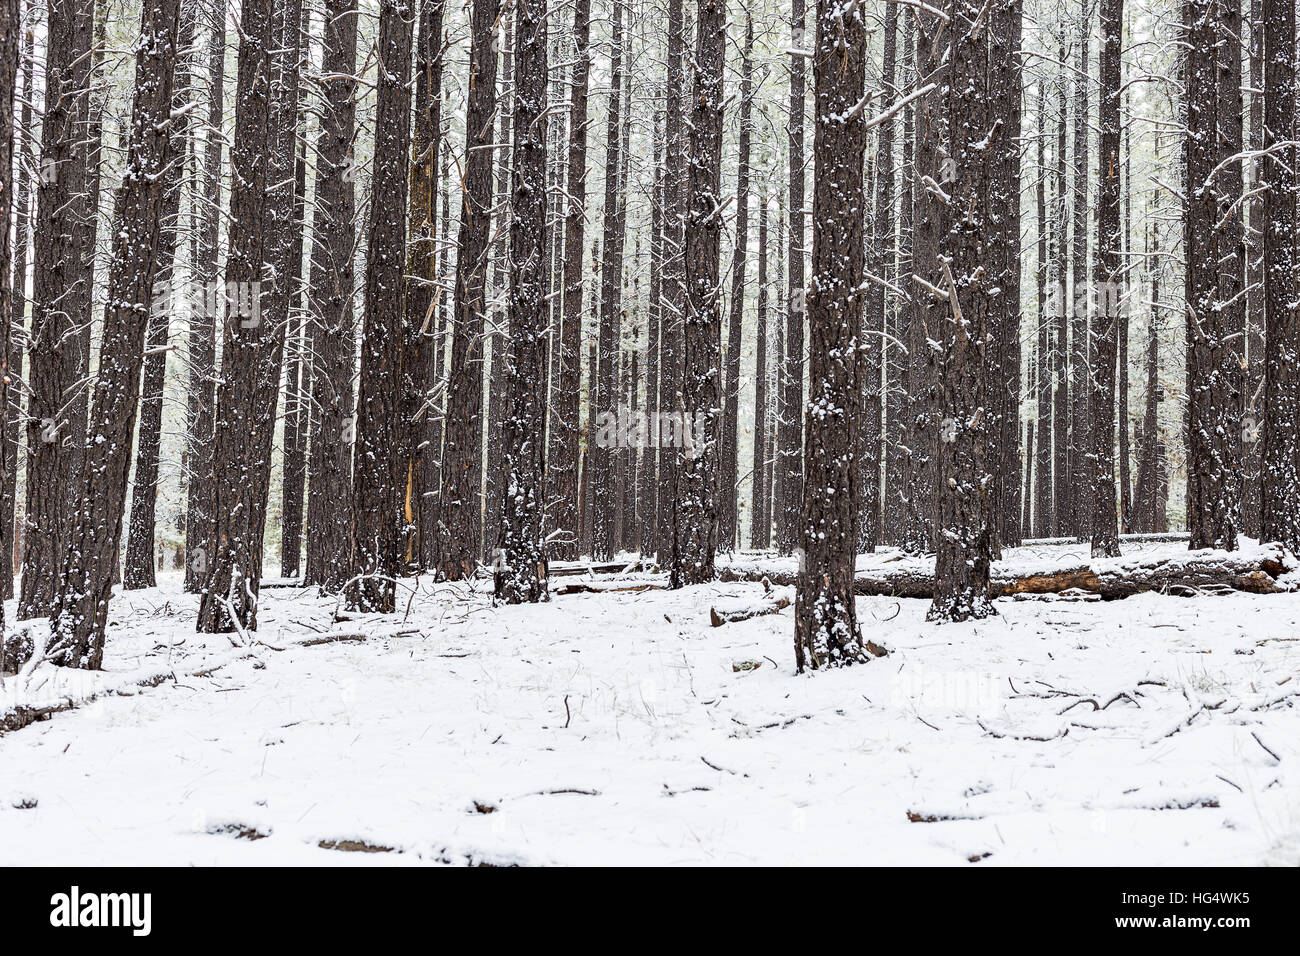 Snowy winter forest scene Banque D'Images